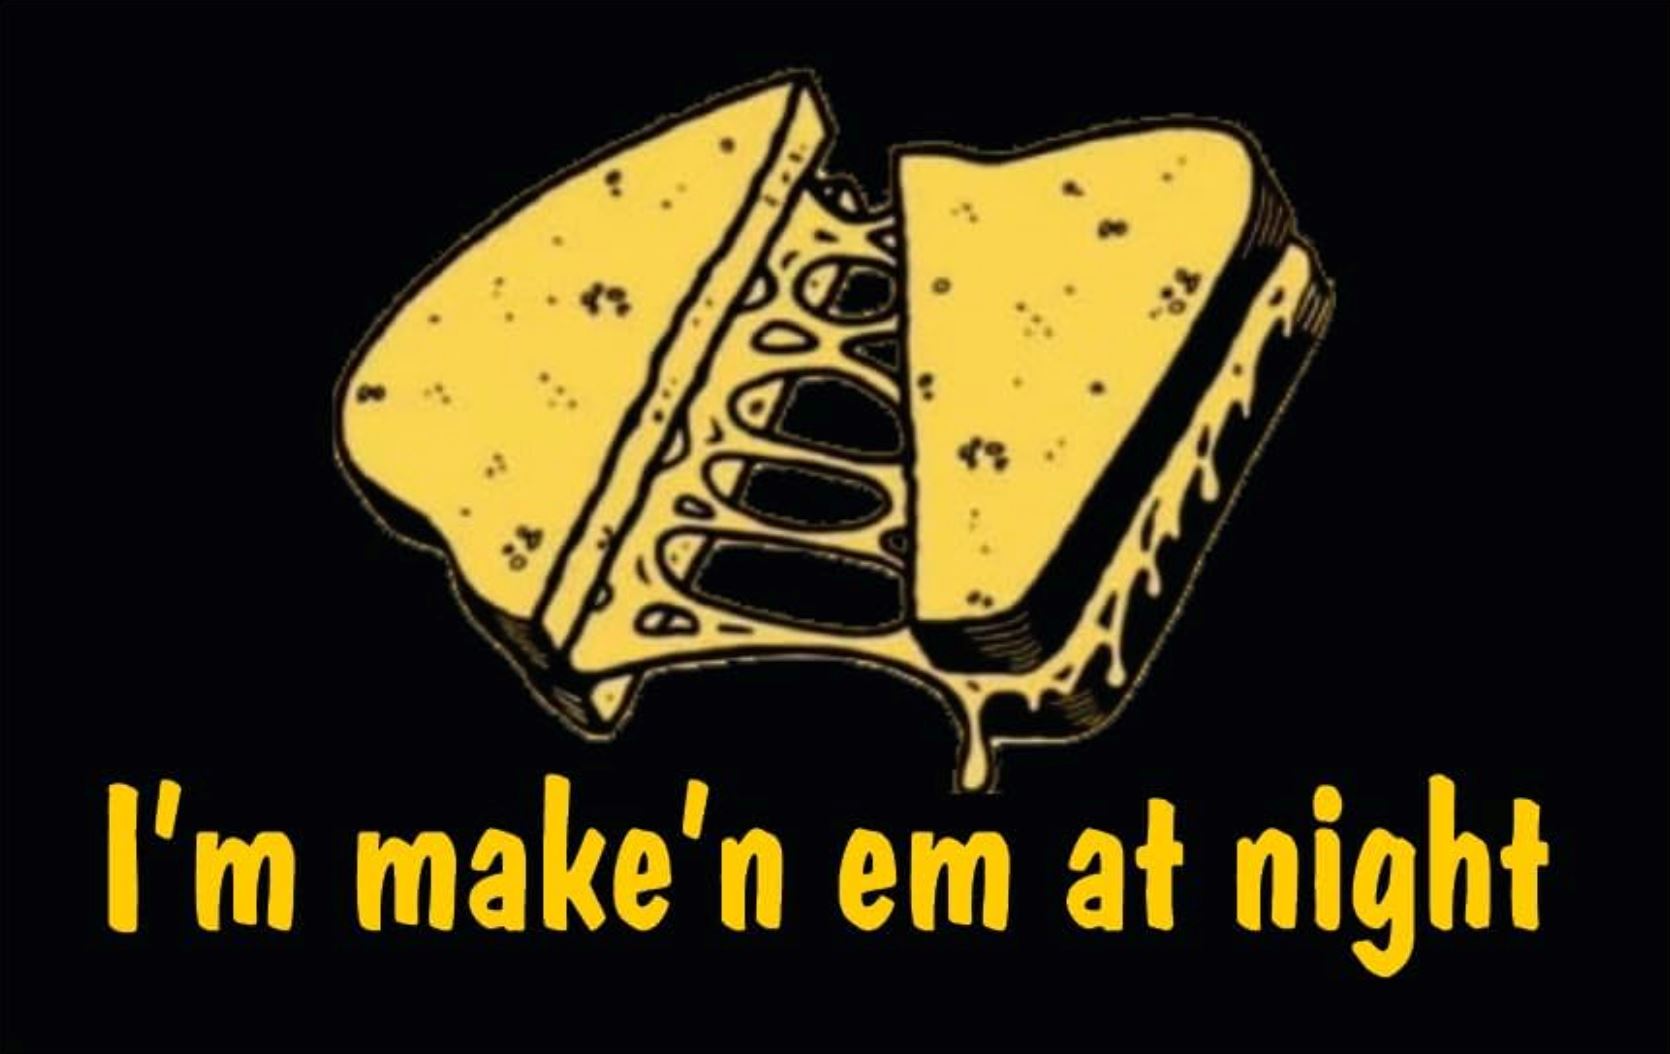 Grilled Cheese Sandwich "I'm mak'n em at night" Morale Patches Redheaded T Shirts 